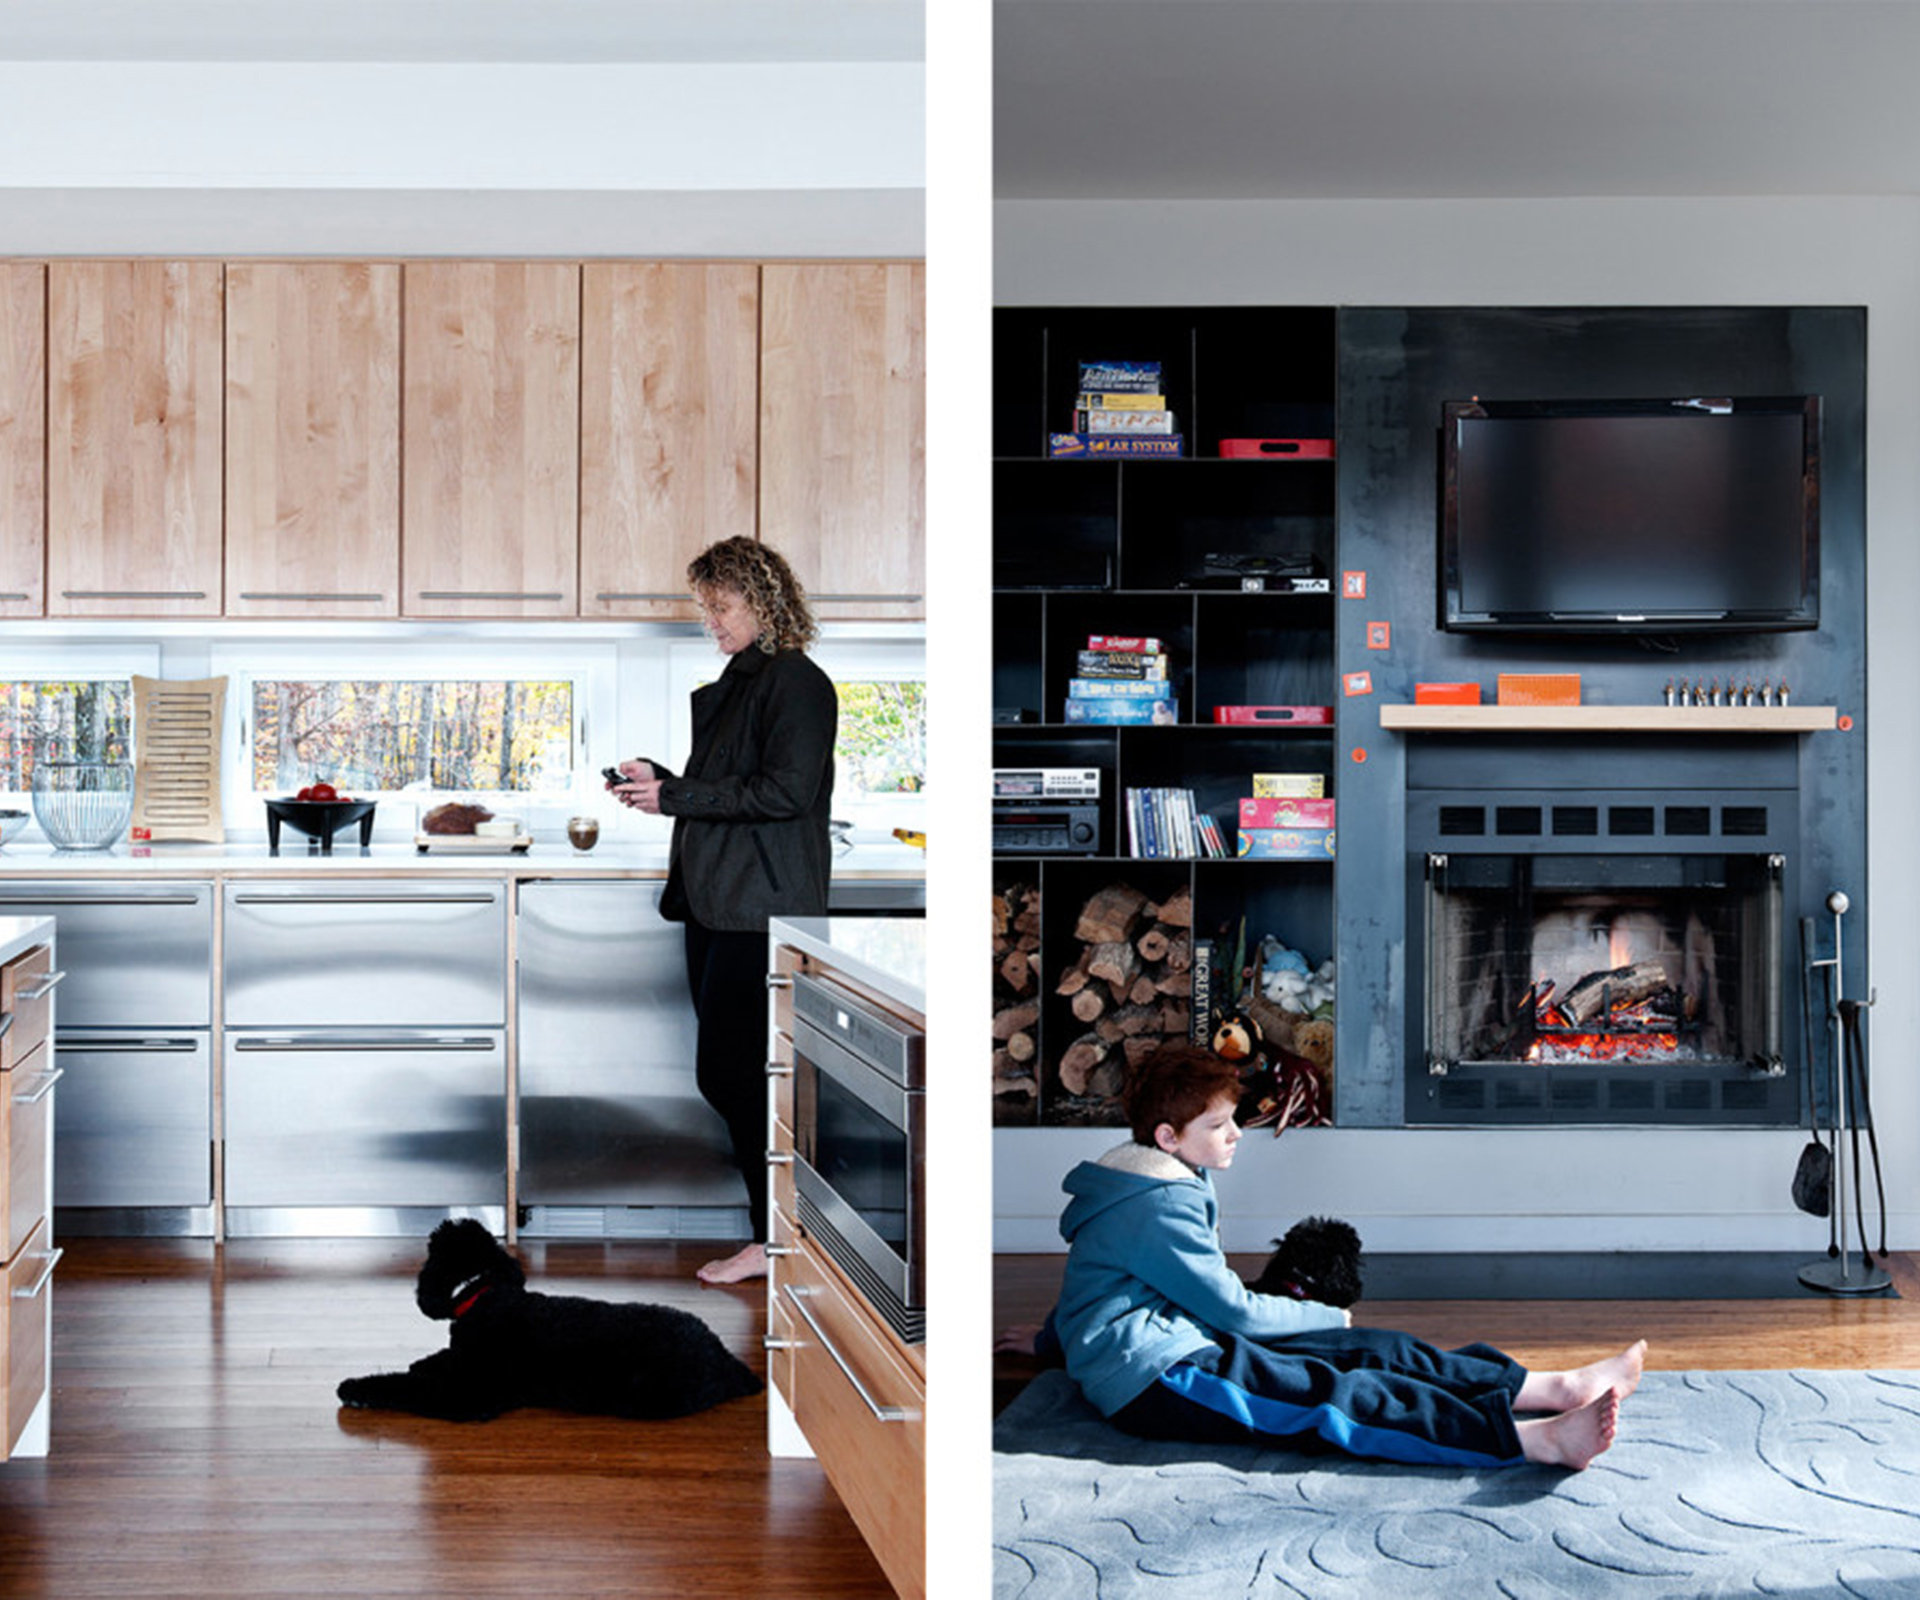 Gibbs (pictured with Max the poodle) admits it's difficult to design a kitchen "with no walls" without compromising essentials such as fridges, but the open and airy space is now her favourite in the house (left). The fireplace in the living room (right).